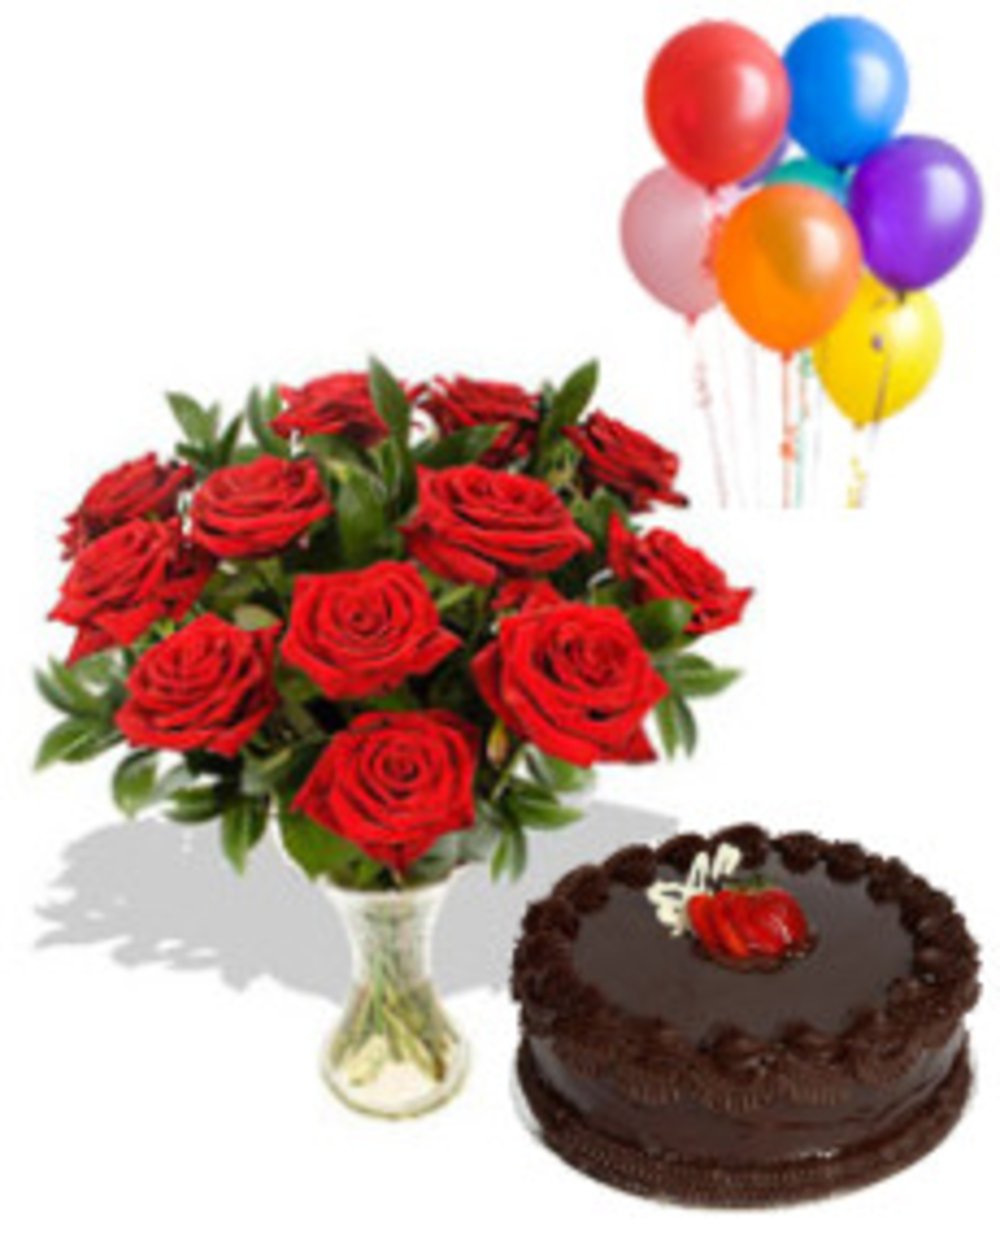 Red Roses, Cake & Balloons